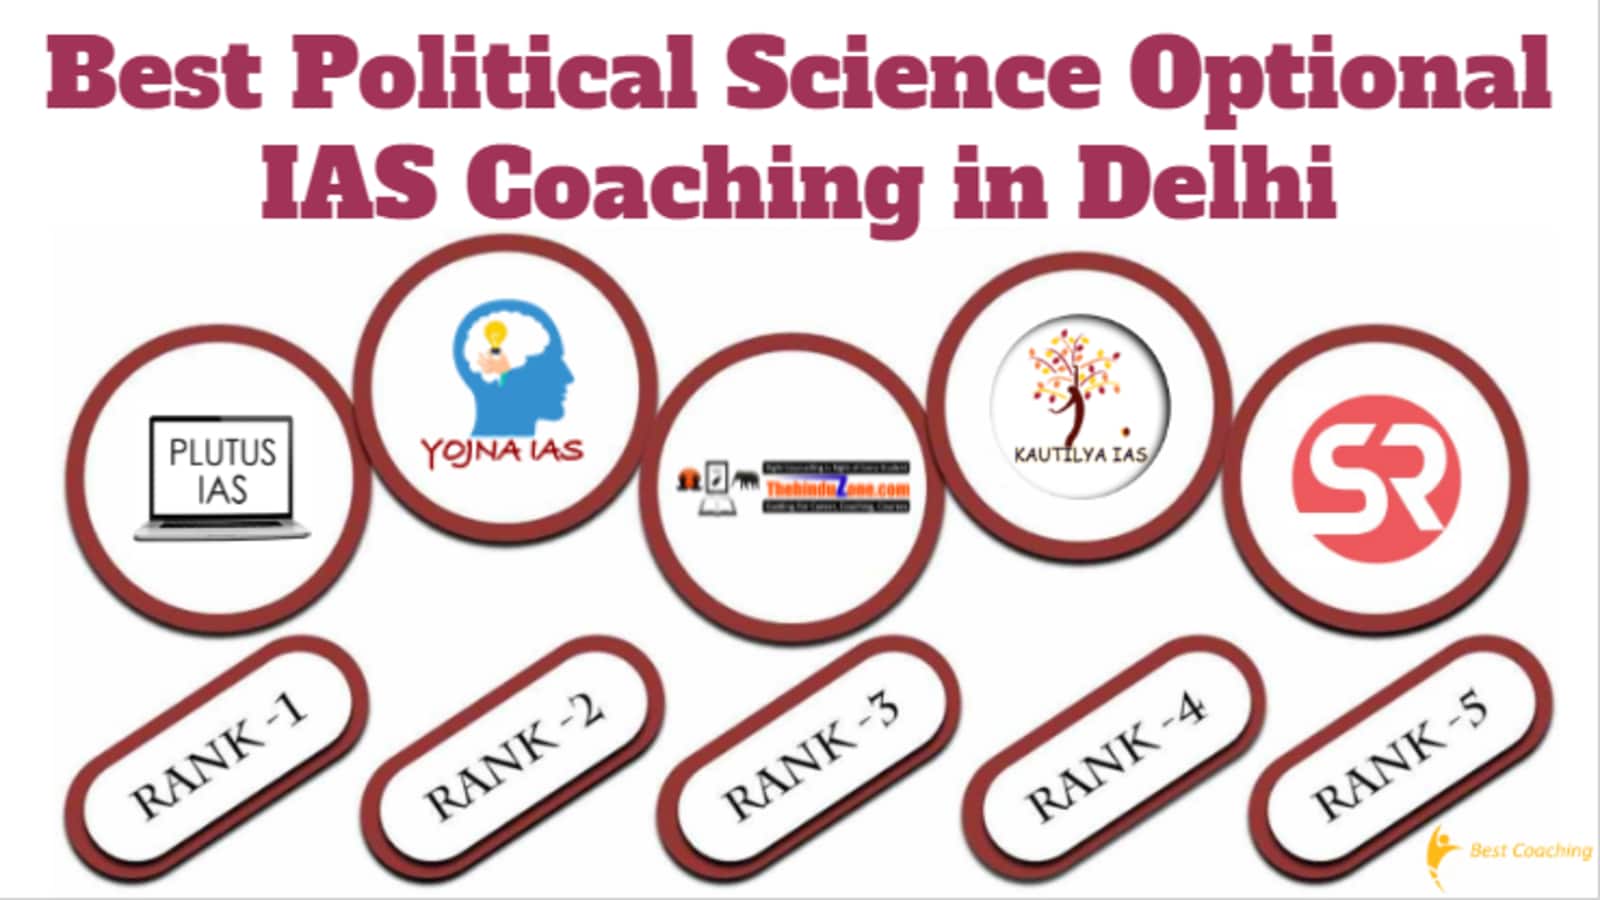 Top Political Science and International Relations Optional IAS Coaching in Delhi